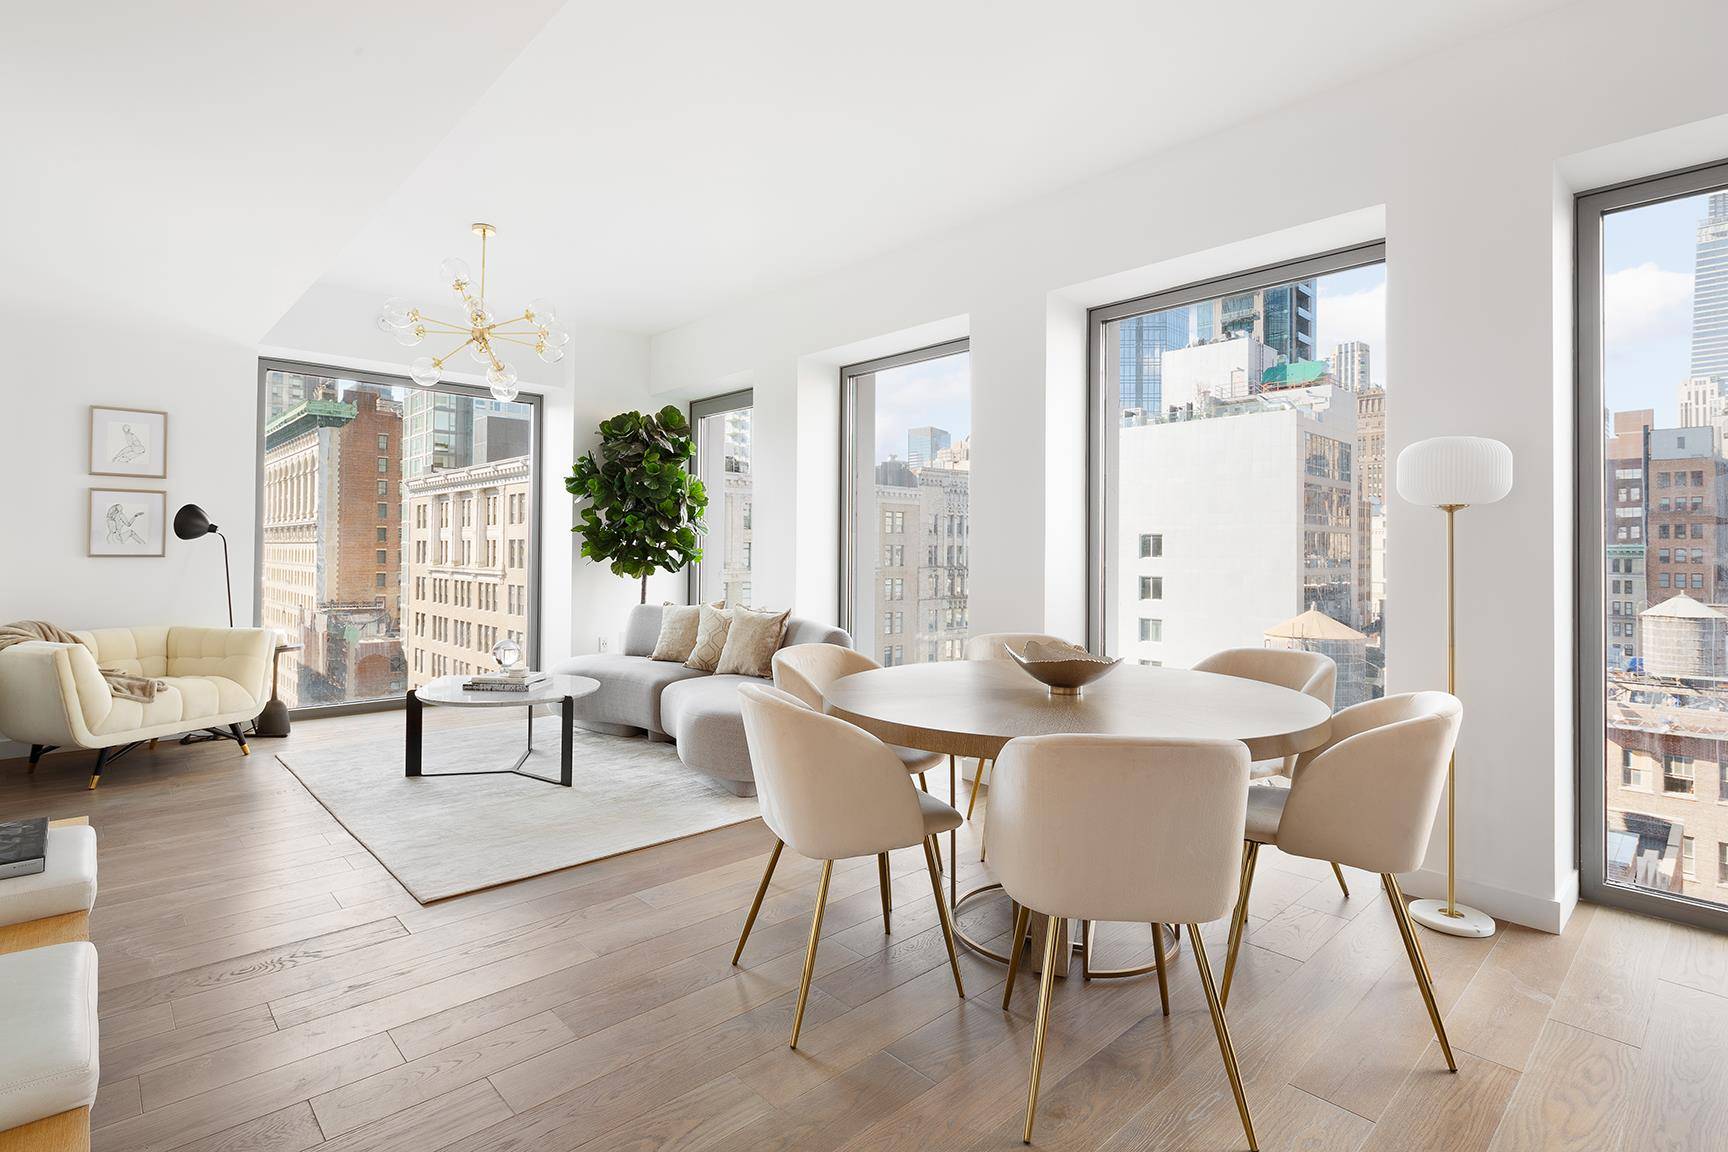 Welcome to the Neo Gothic splendor that is 30 East 31 in the historic and trendy NoMad North of Madison Square Park, an area characterized by varied architectural styles, from ...